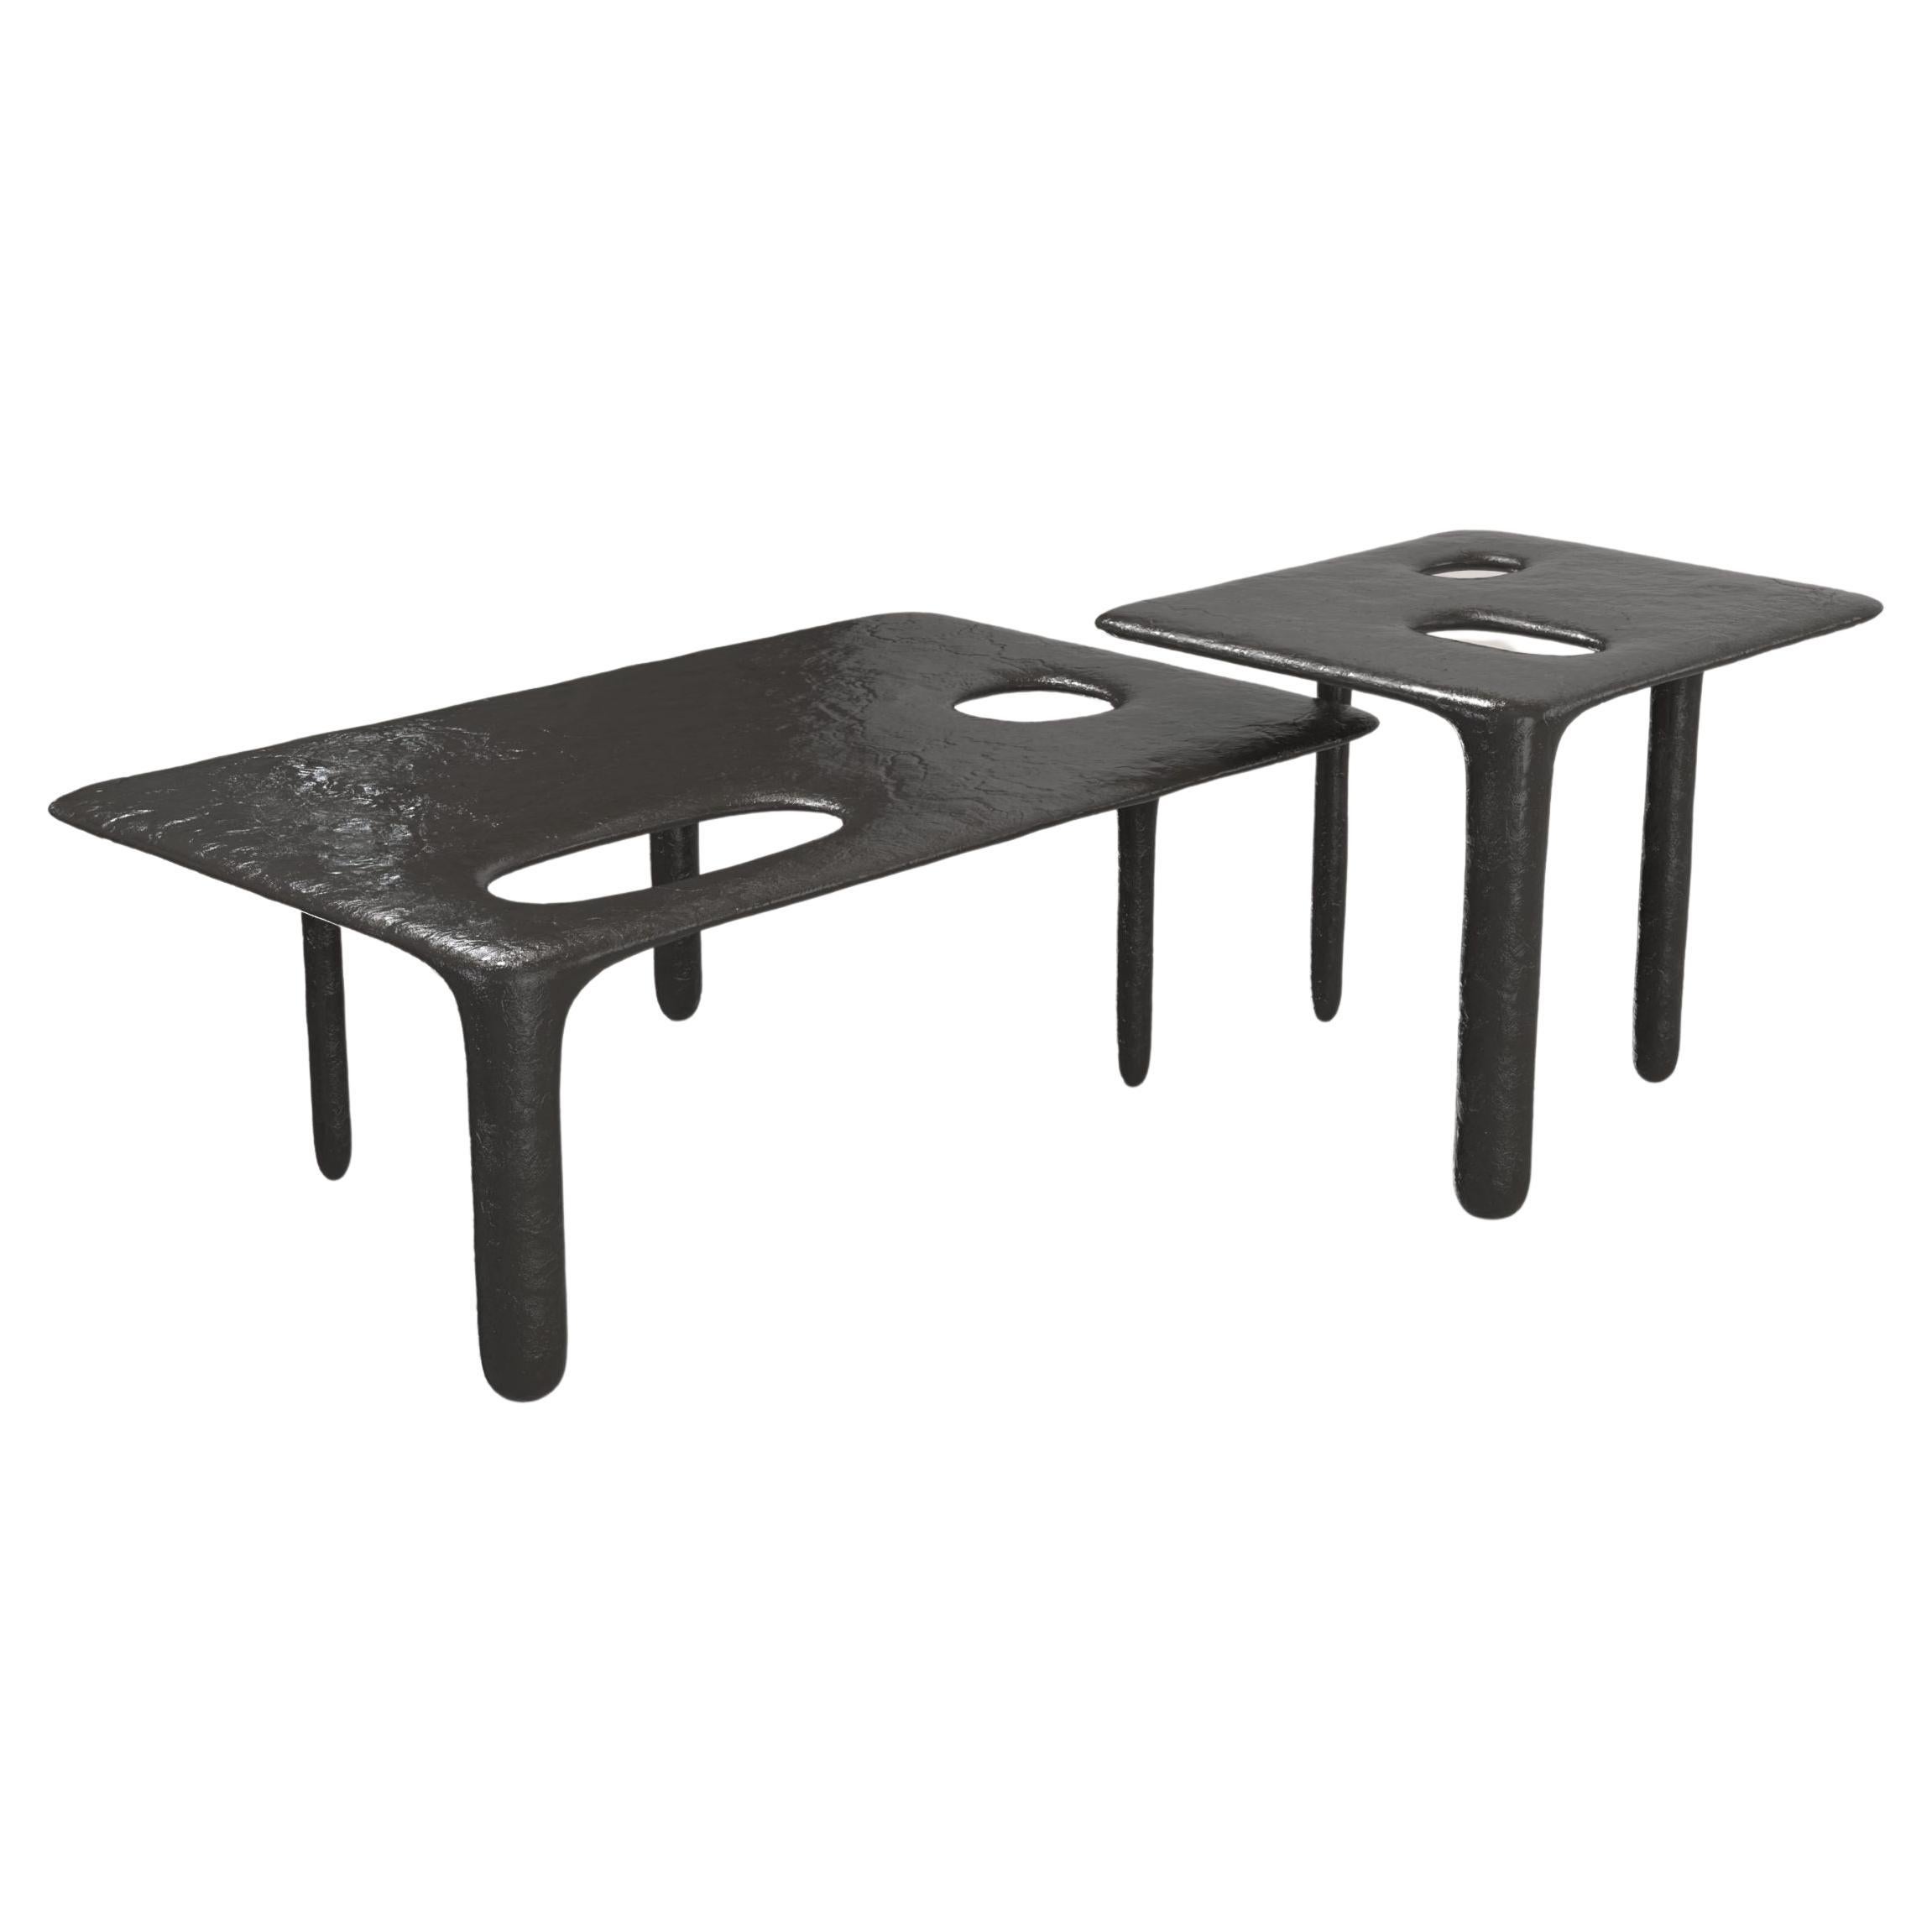 Set of 2 Oasi V1 and V2 Low Tables by Edizione Limitata For Sale